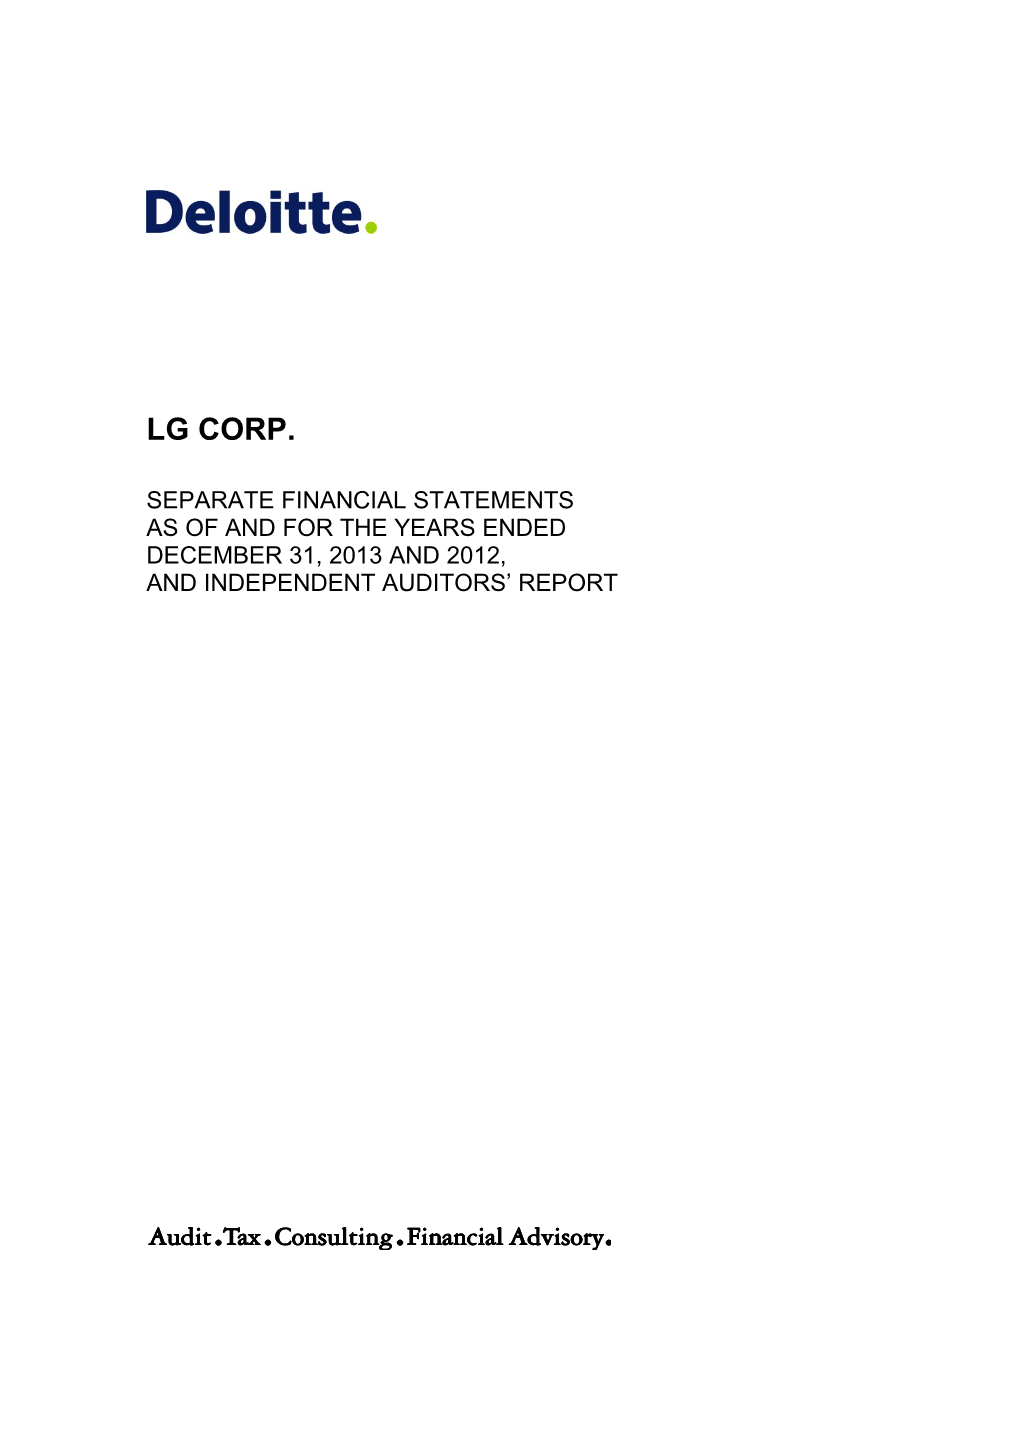 LG Corp. FY2012 Separate Audit Report